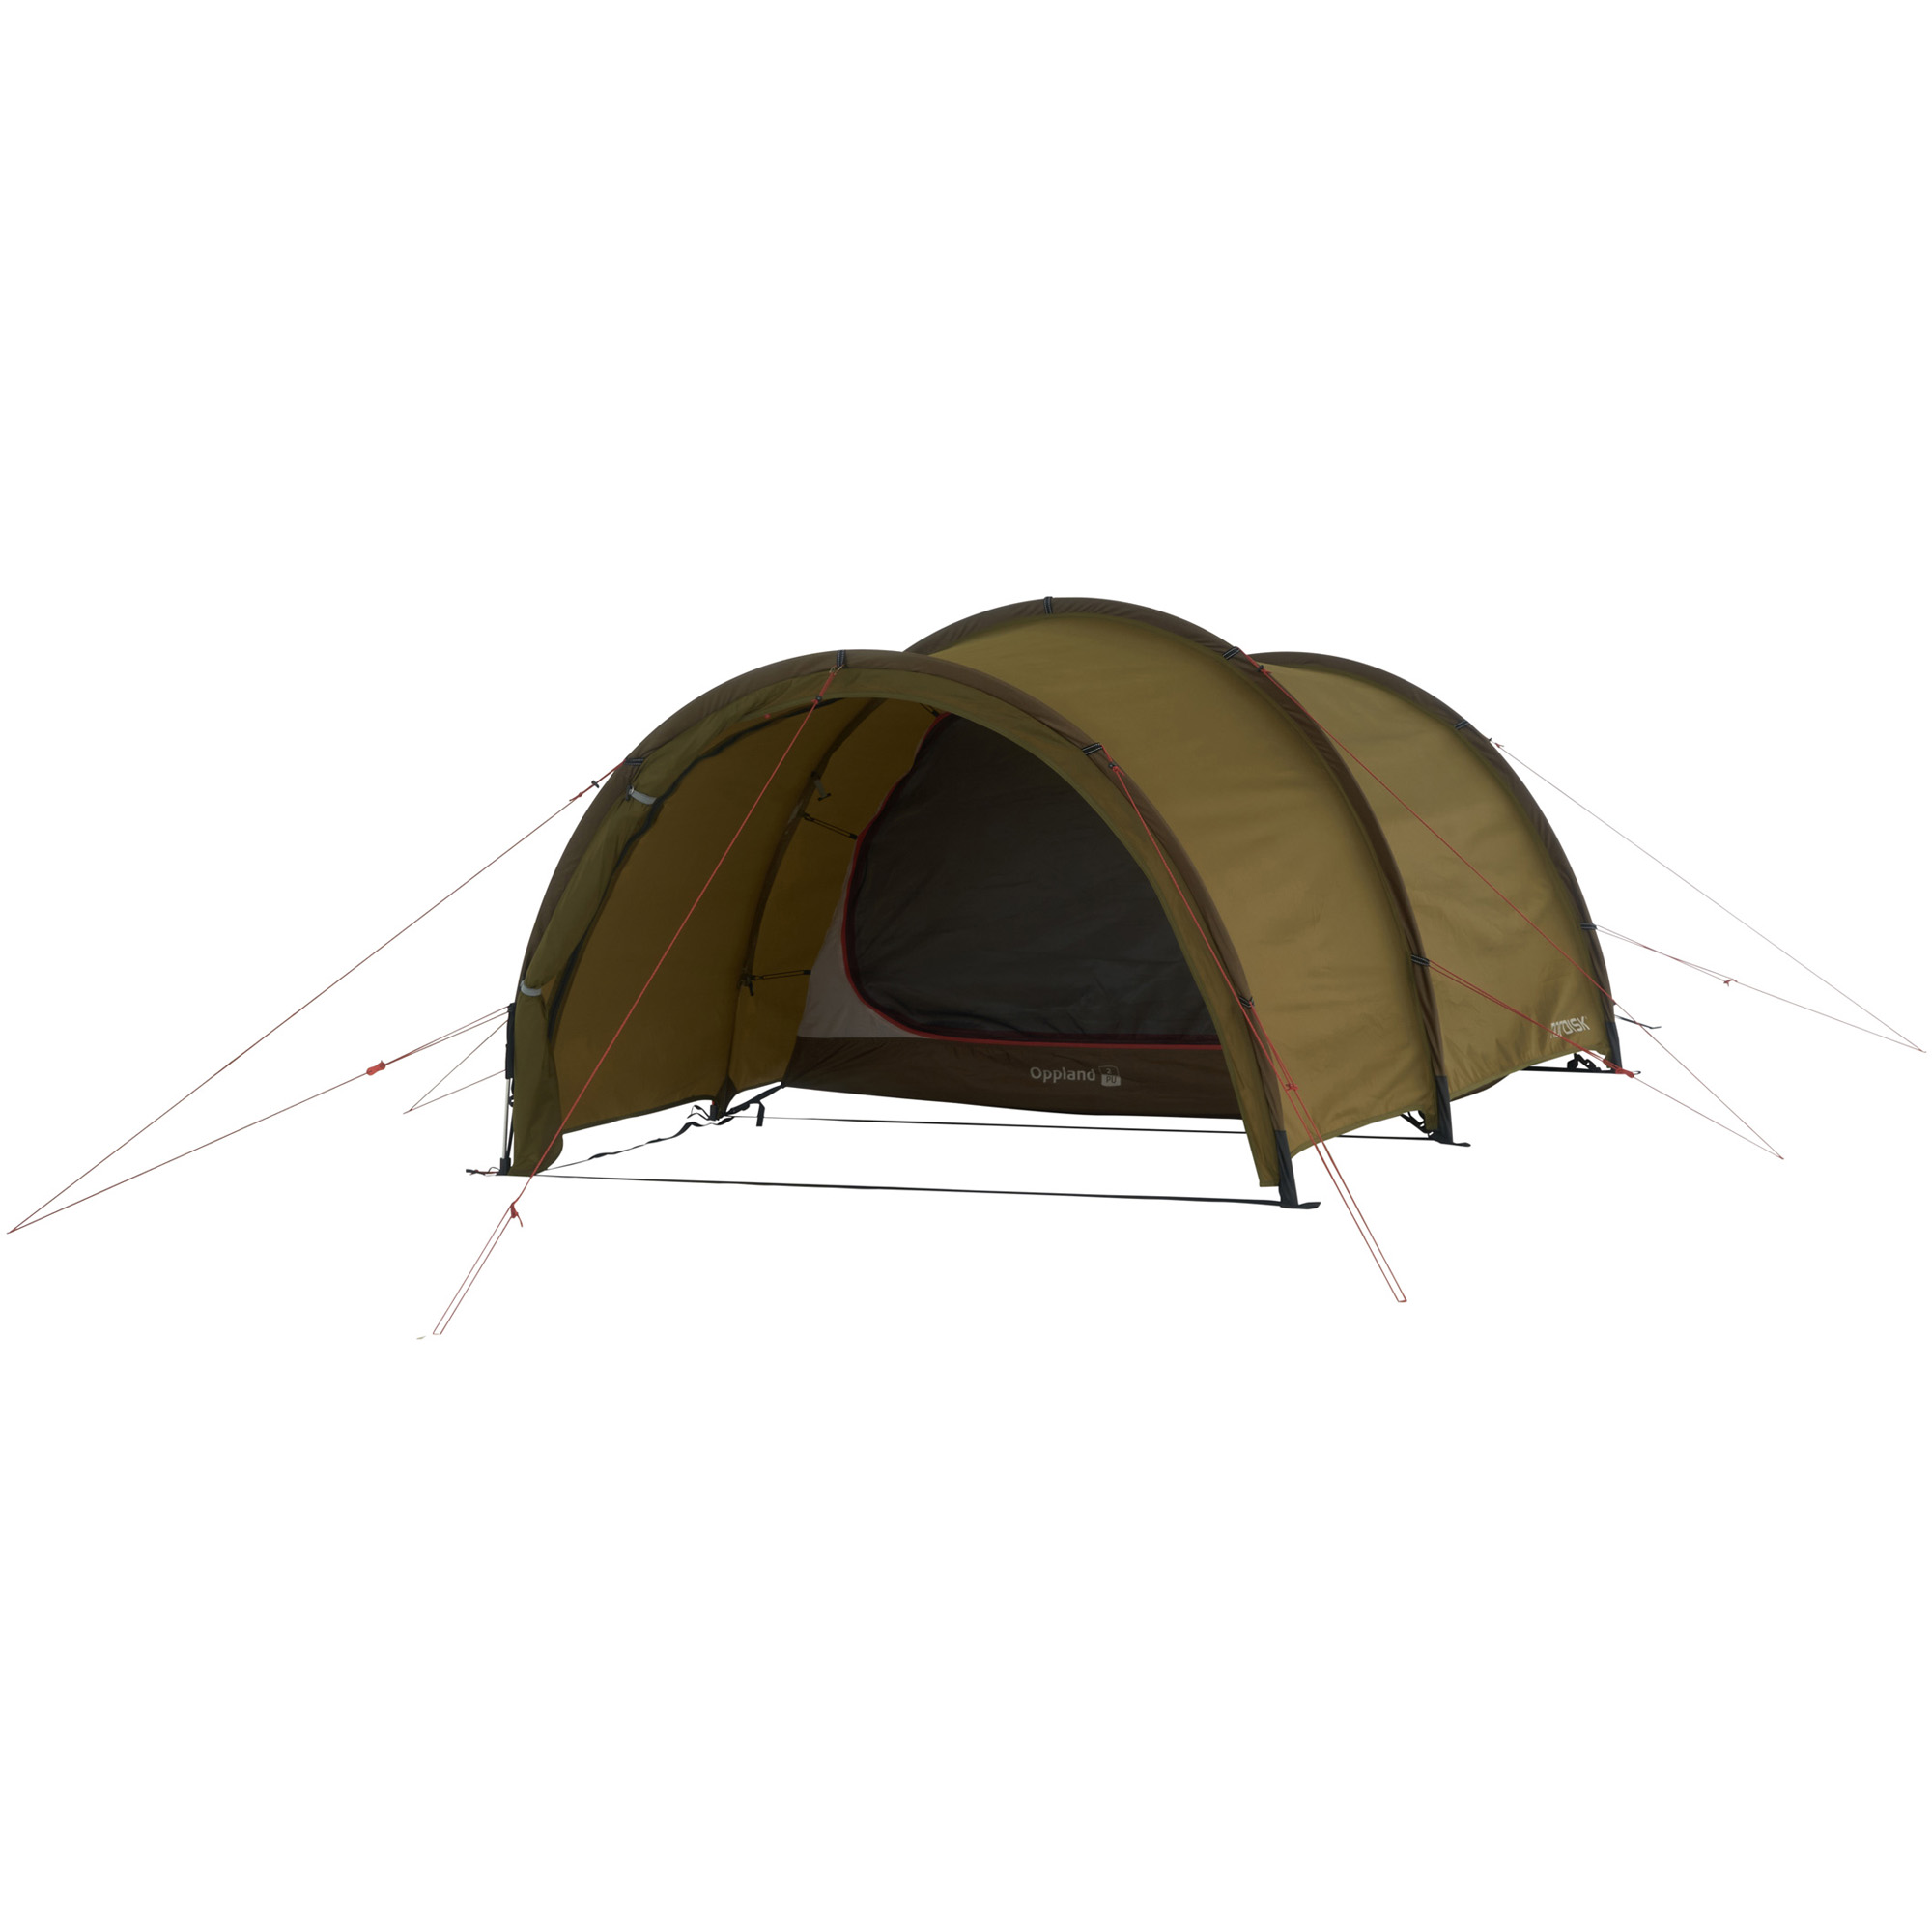 Nordisk Oppland 2 2.0 PU Backpacking Tent